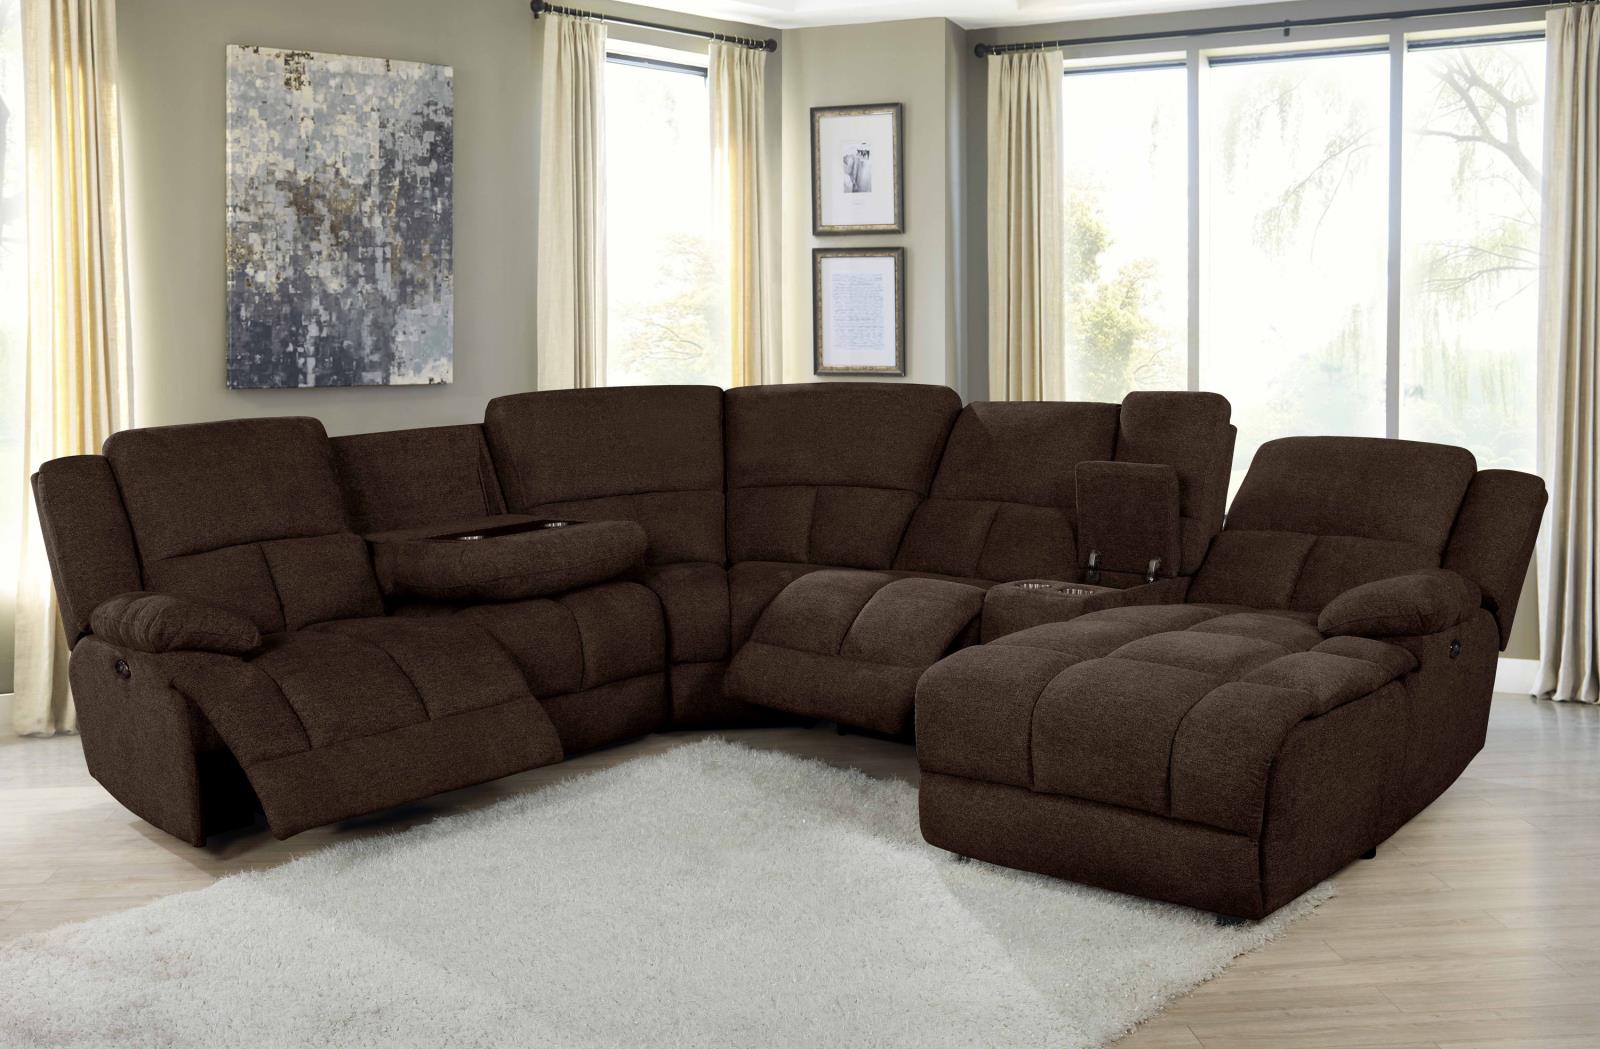 Belize 6-piece Pillow Top Arm Power Sectional Brown - What A Room